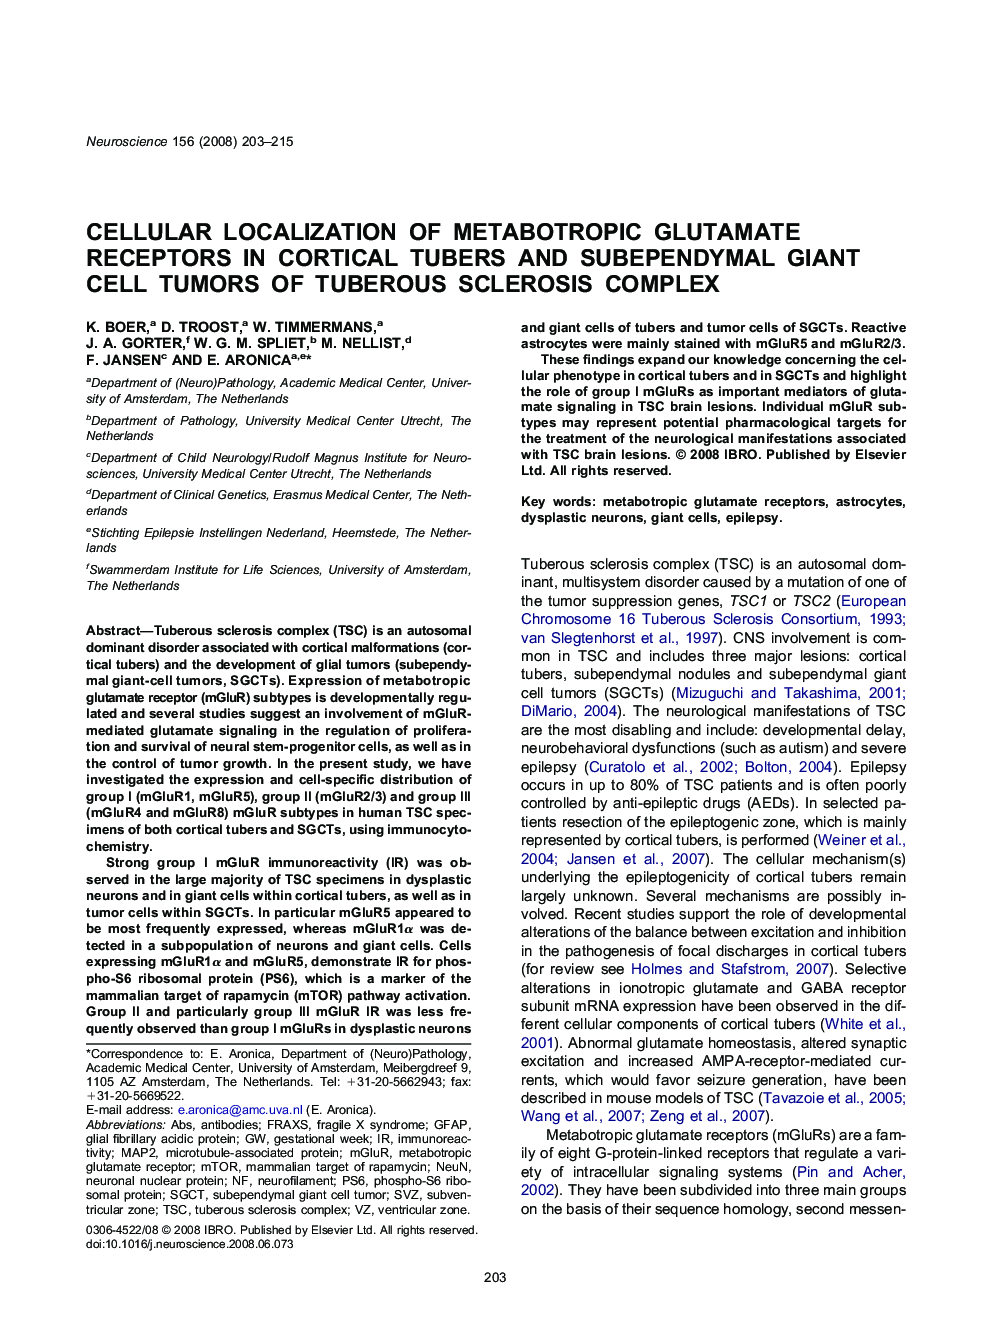 Systems neuroscienceCellular localization of metabotropic glutamate receptors in cortical tubers and subependymal giant cell tumors of tuberous sclerosis complex